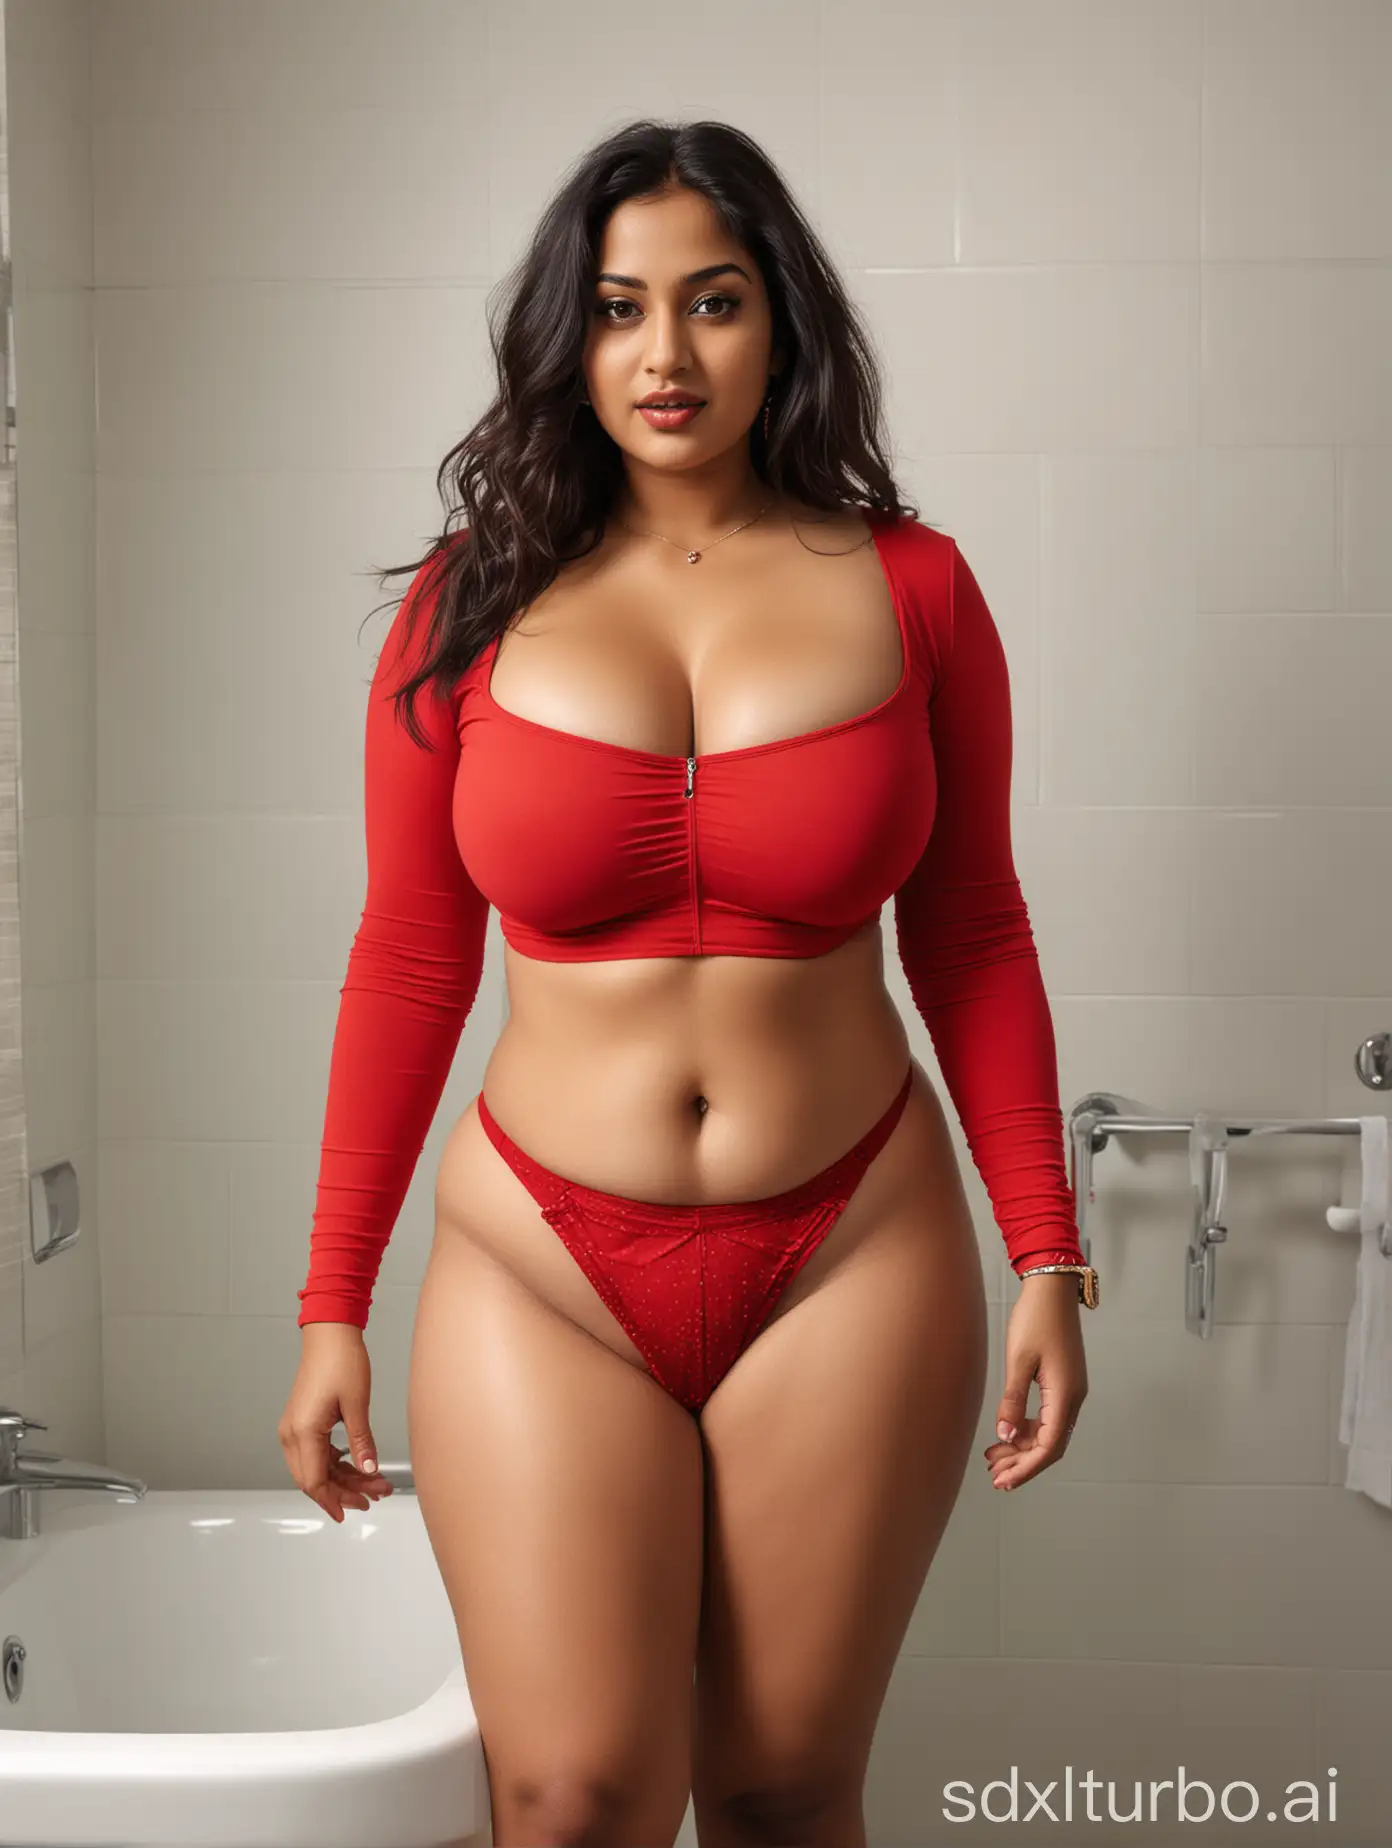 Curvaceous-Indian-Woman-in-Red-Crop-Top-and-Thong-Posing-in-Bathroom